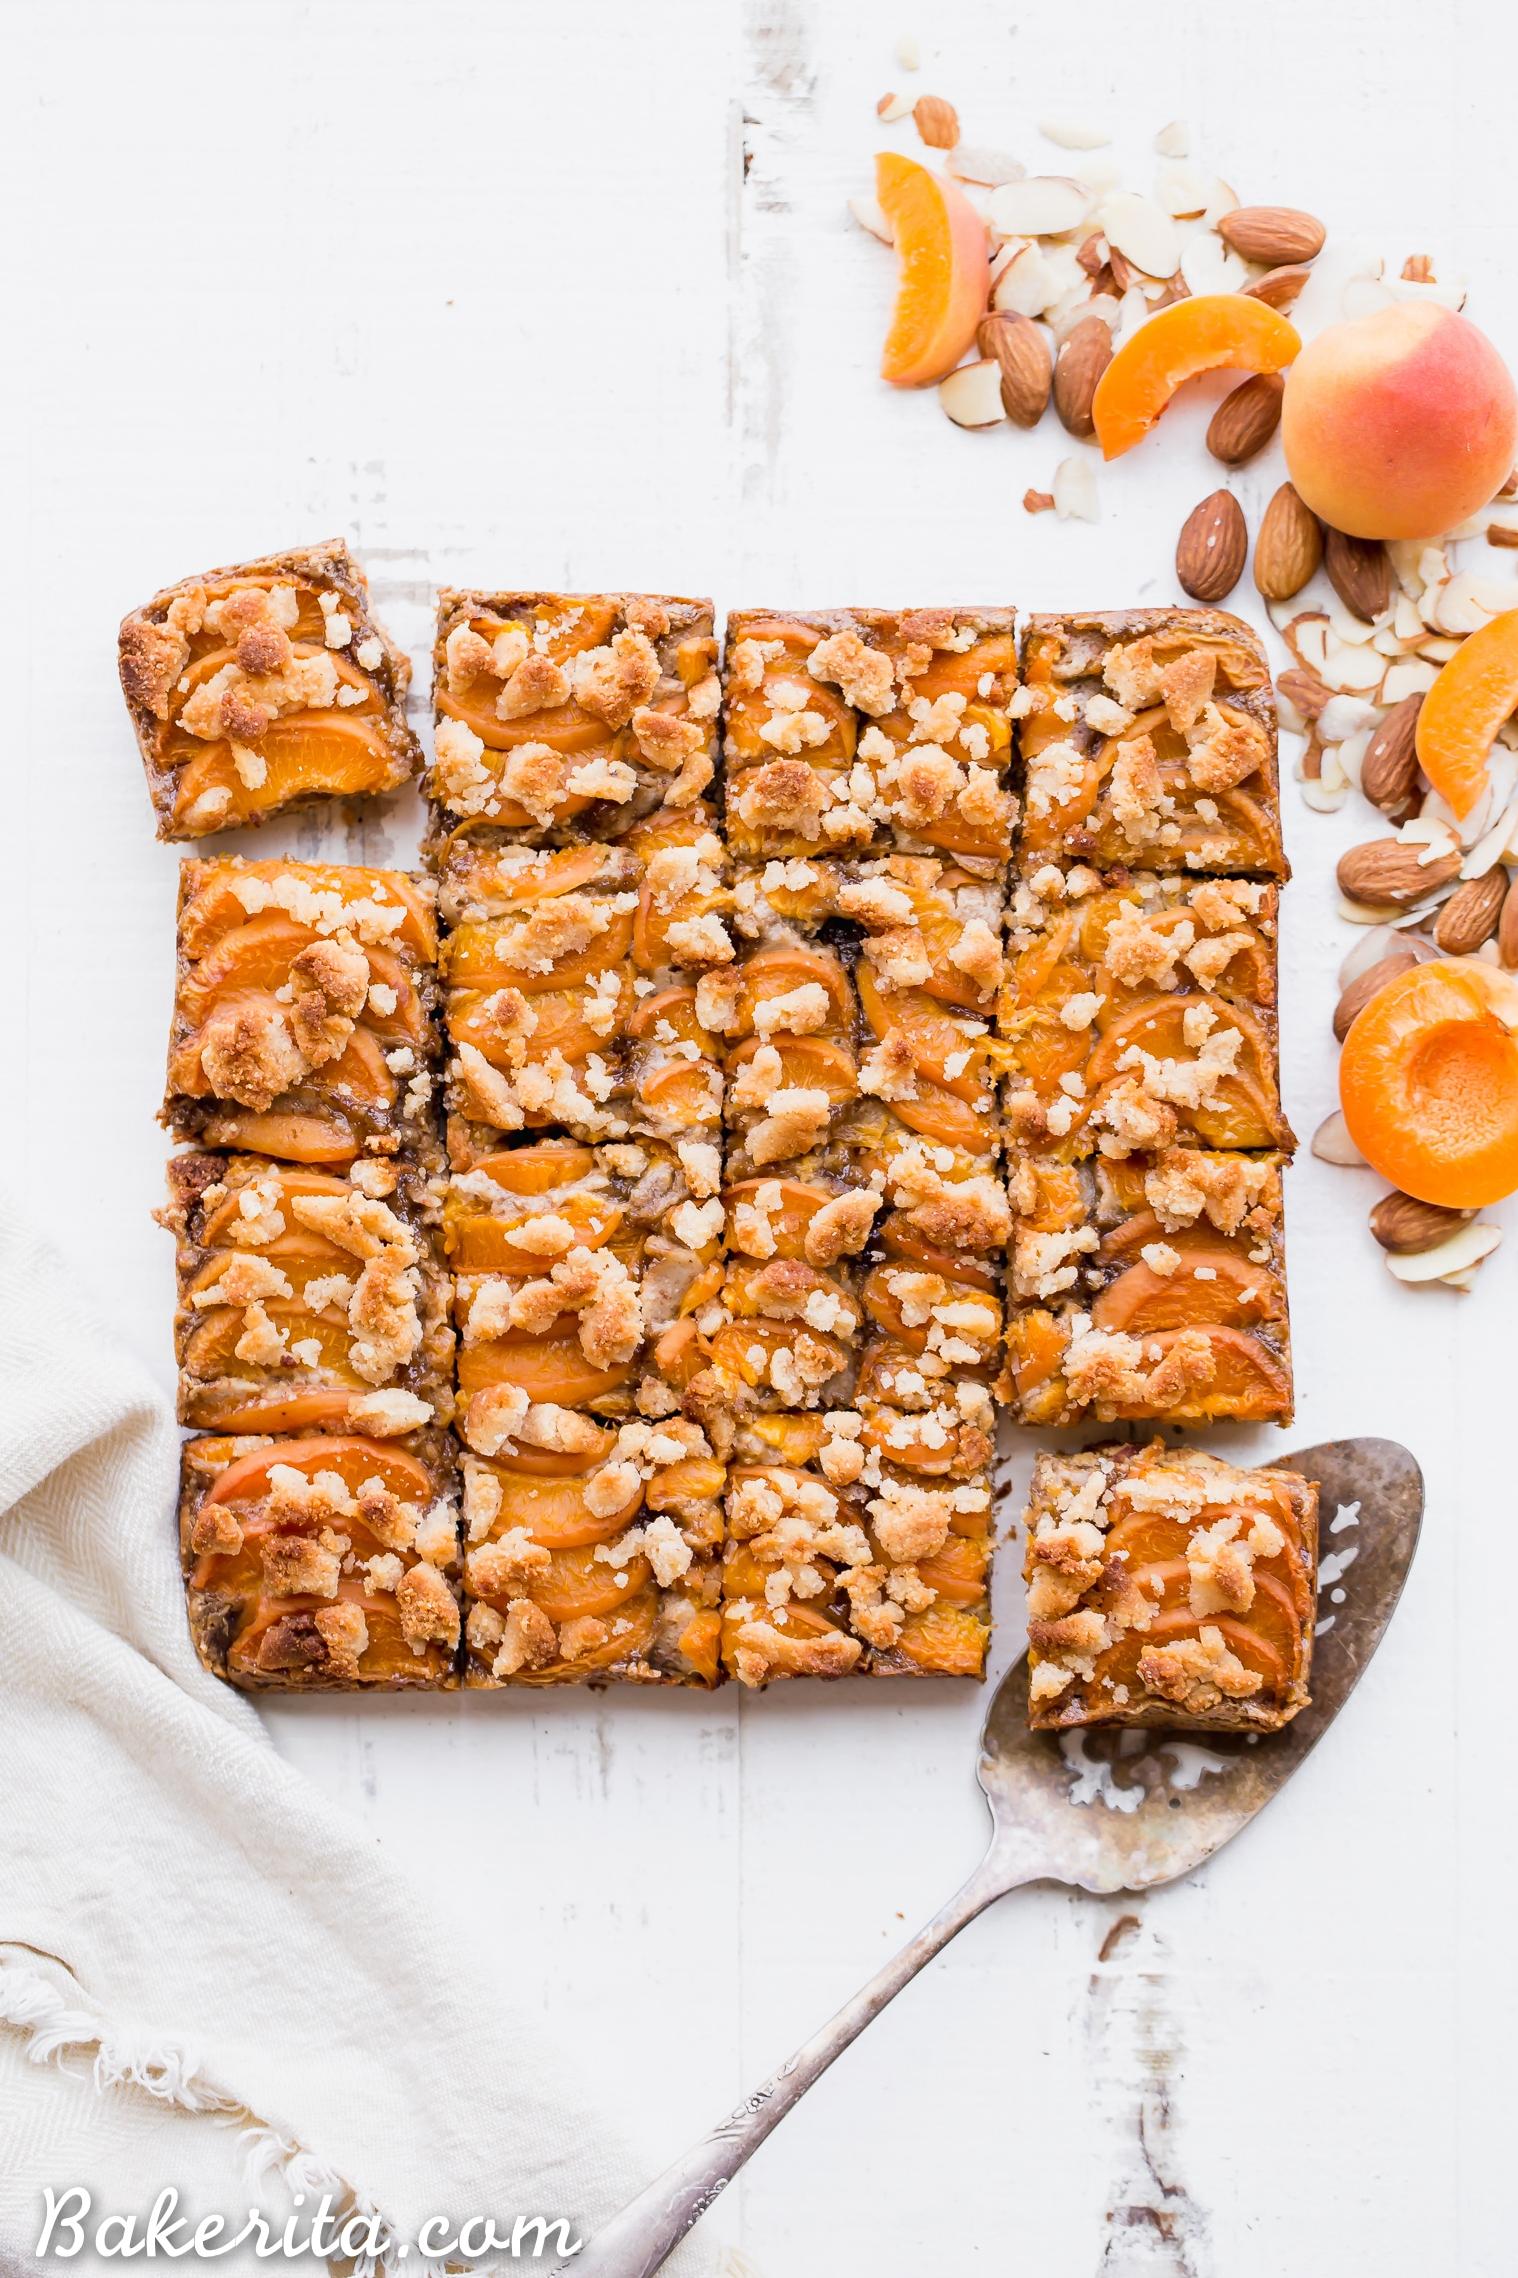  These apricot and almond biscuits are the perfect snack for a picnic in the park or a lazy afternoon at home.